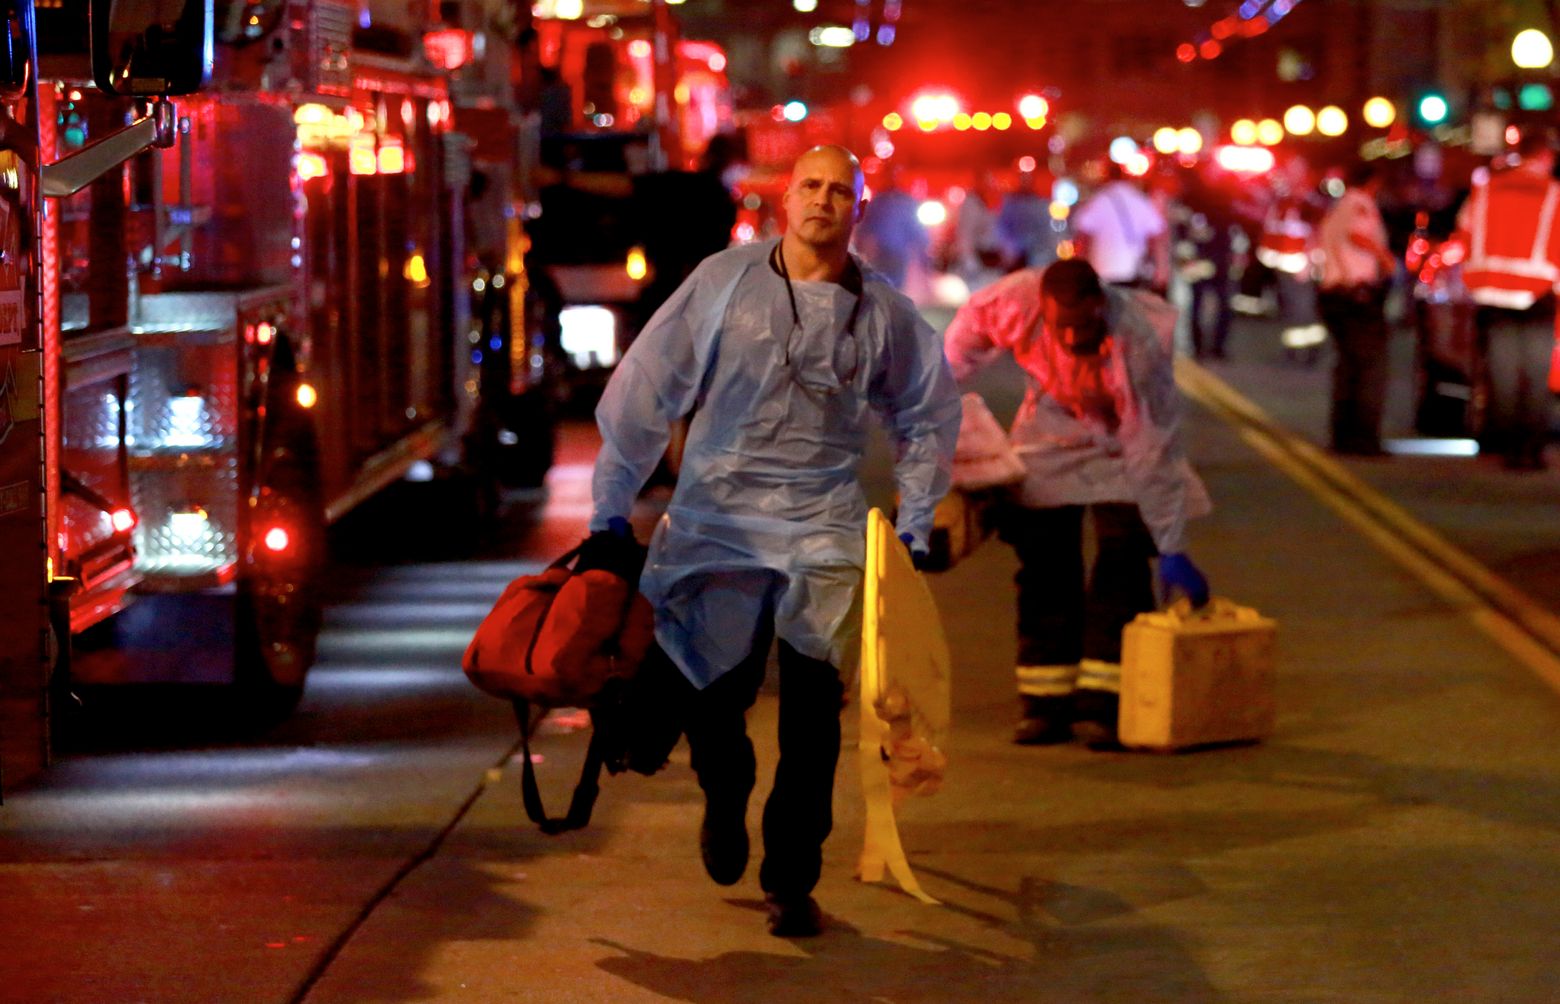 5 people shot in downtown Seattle; search for shooter continues | The Seattle Times1560 x 1004